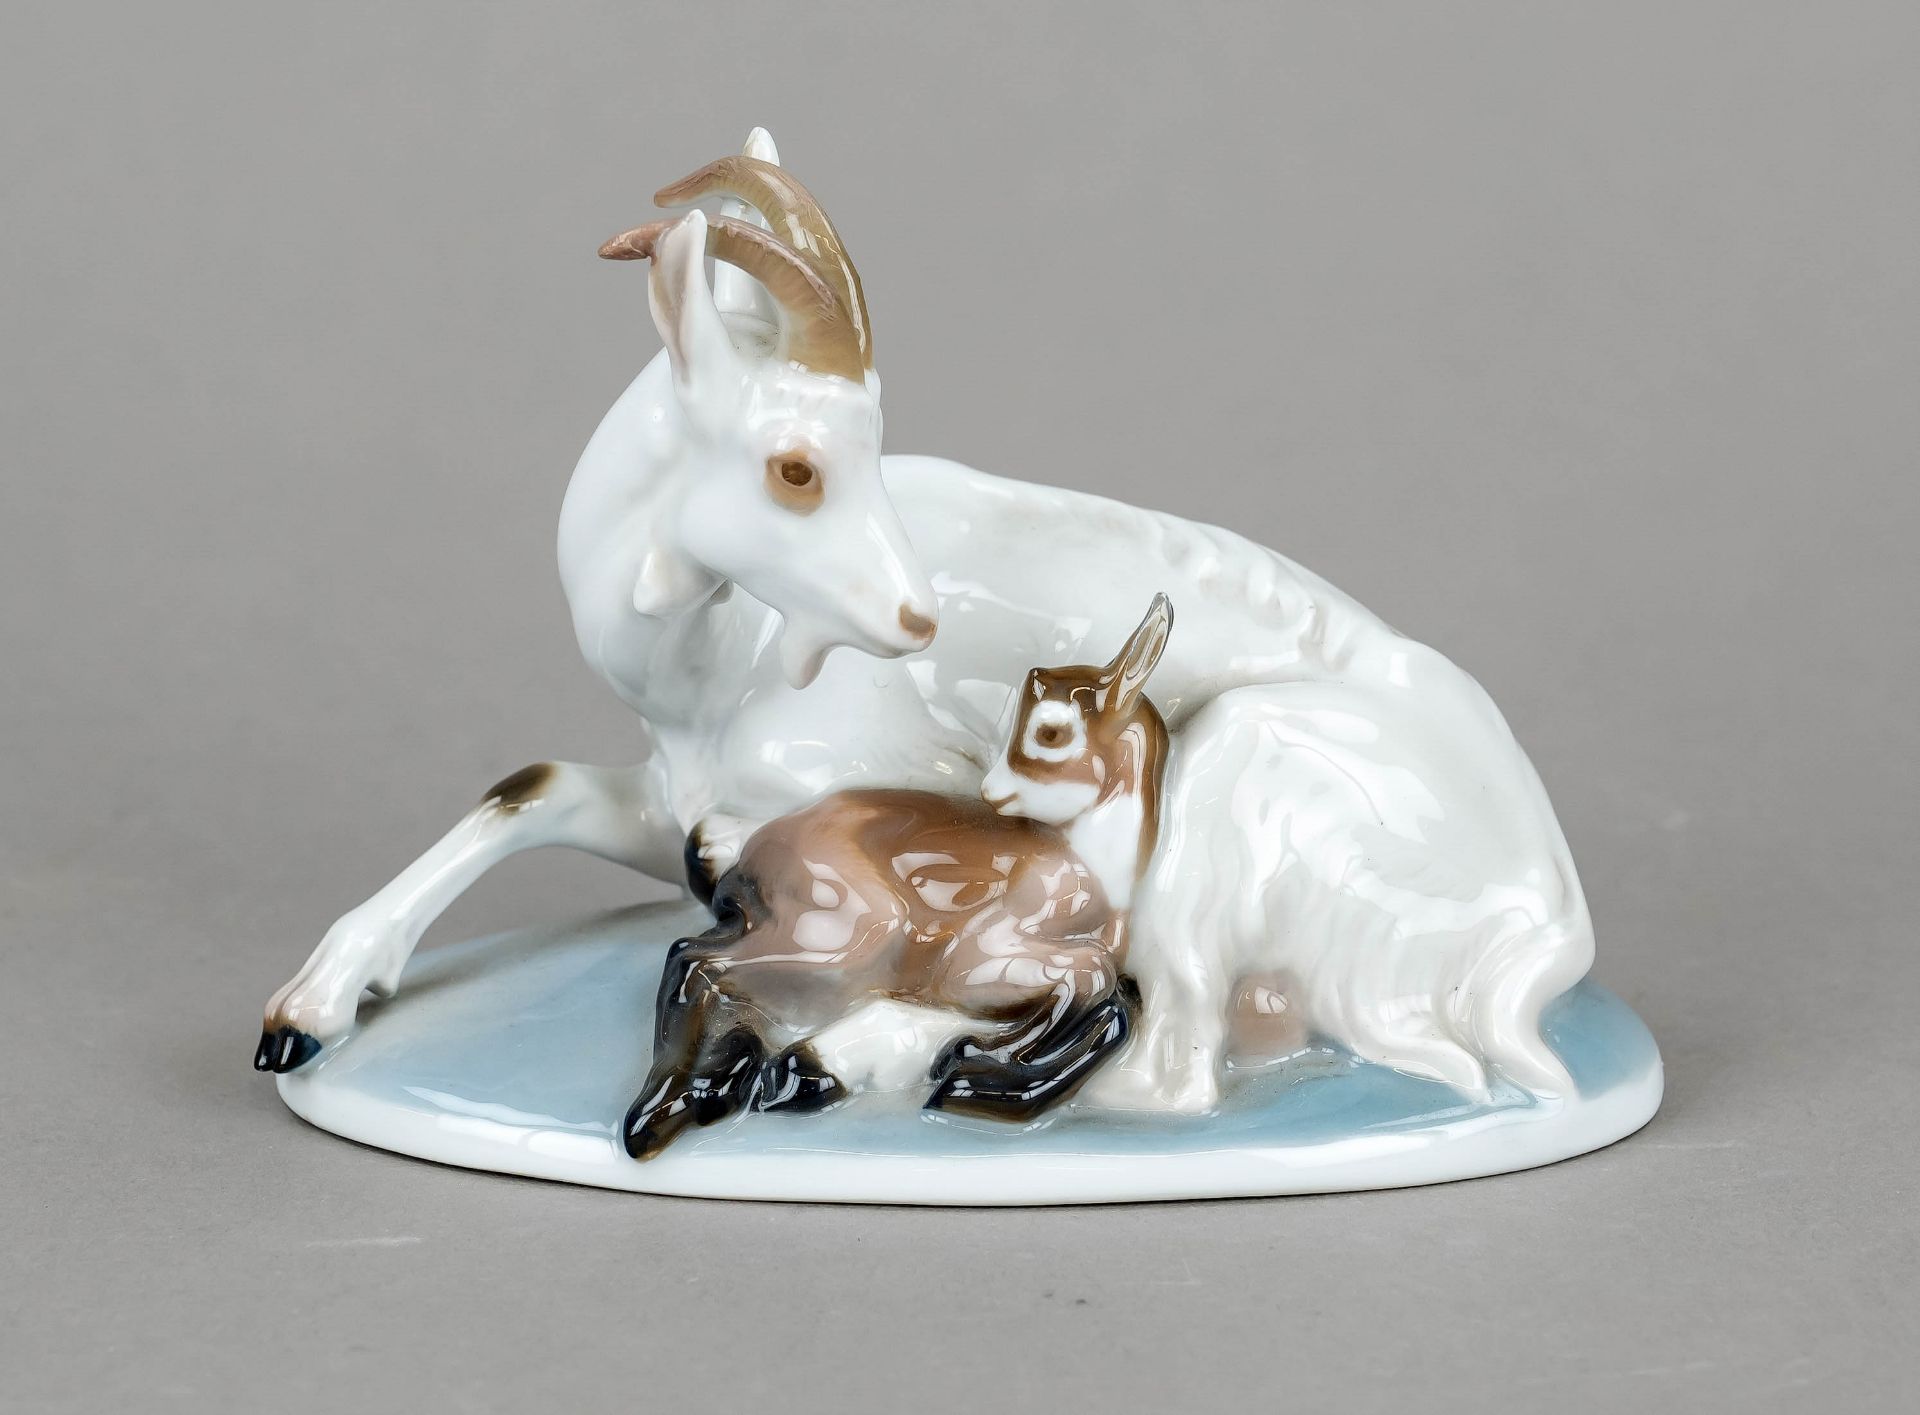 Goat with kid, Rosenthal, Selb-Bavaria, 1931, designed by Theodor Kärner in 1919, signed on the